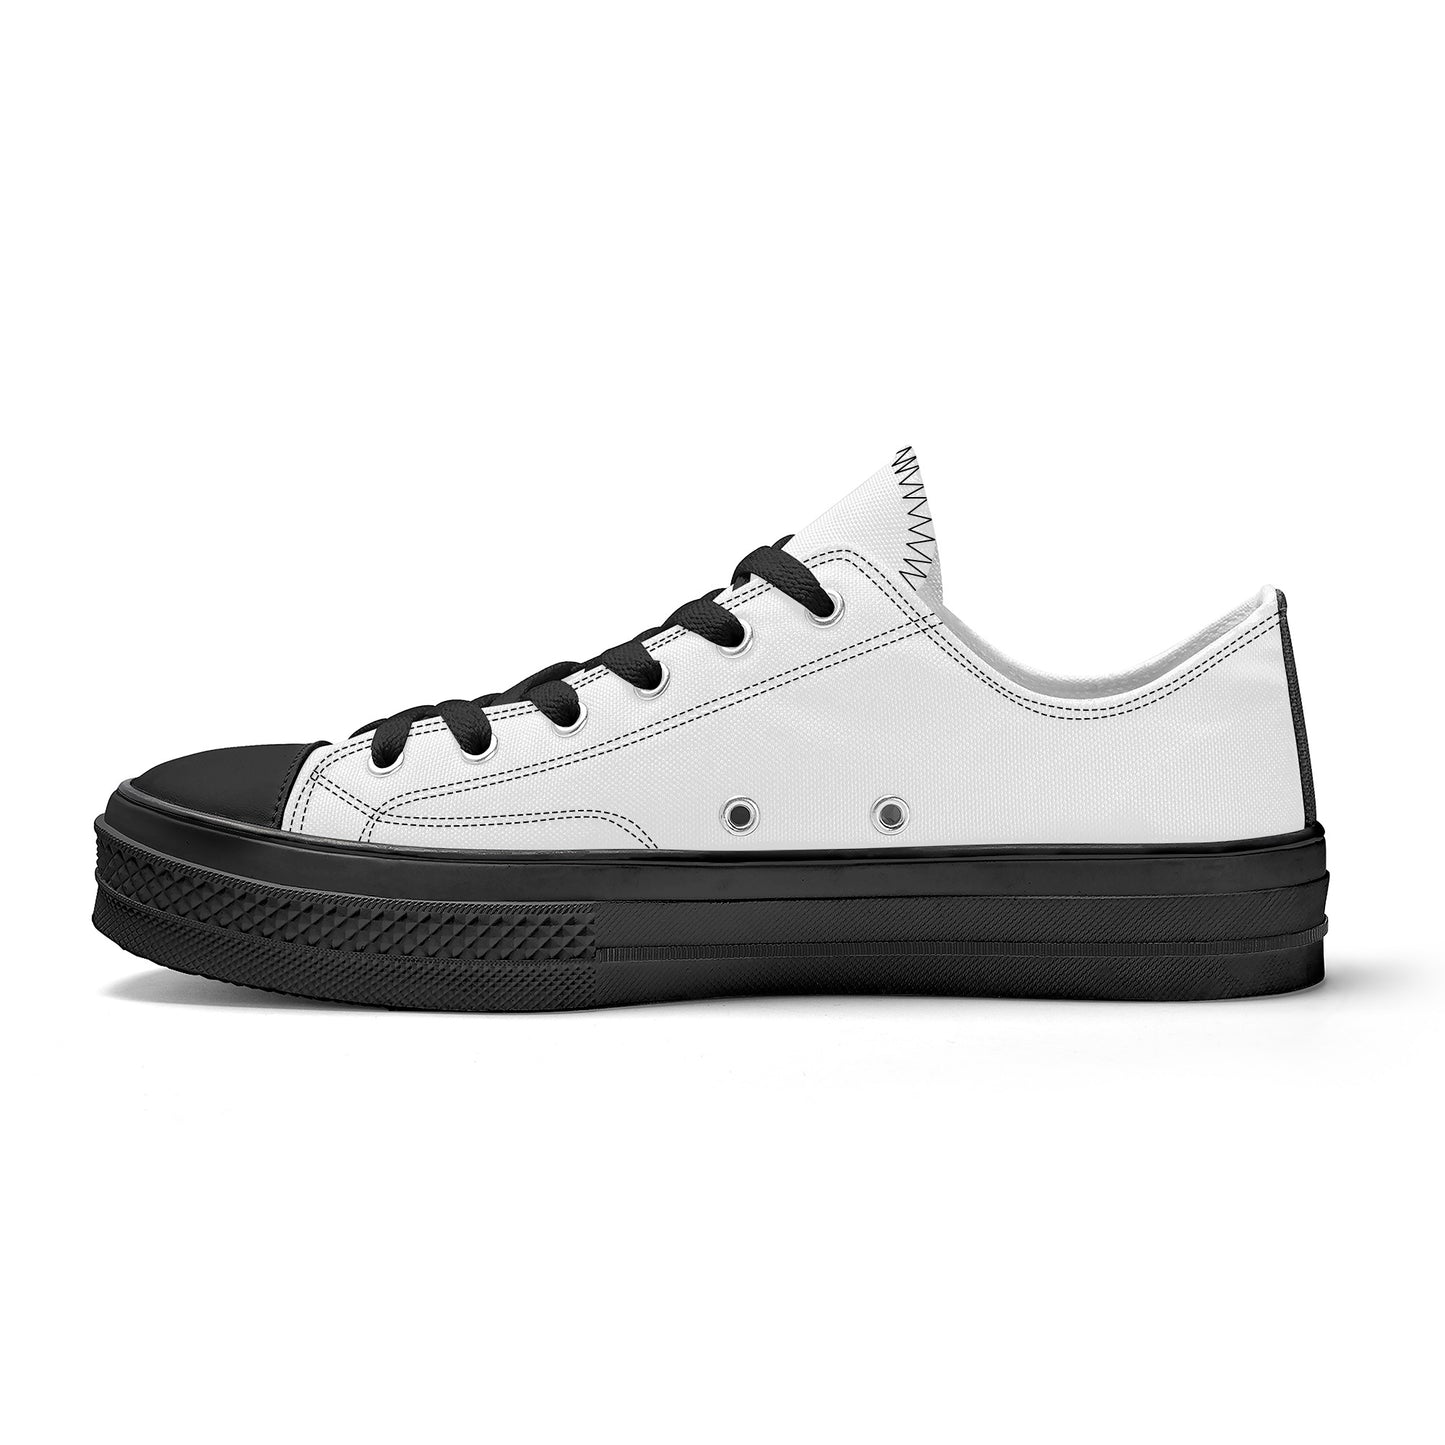 Create Your Own-Unisex Classic Low Top Canvas Shoes - Black